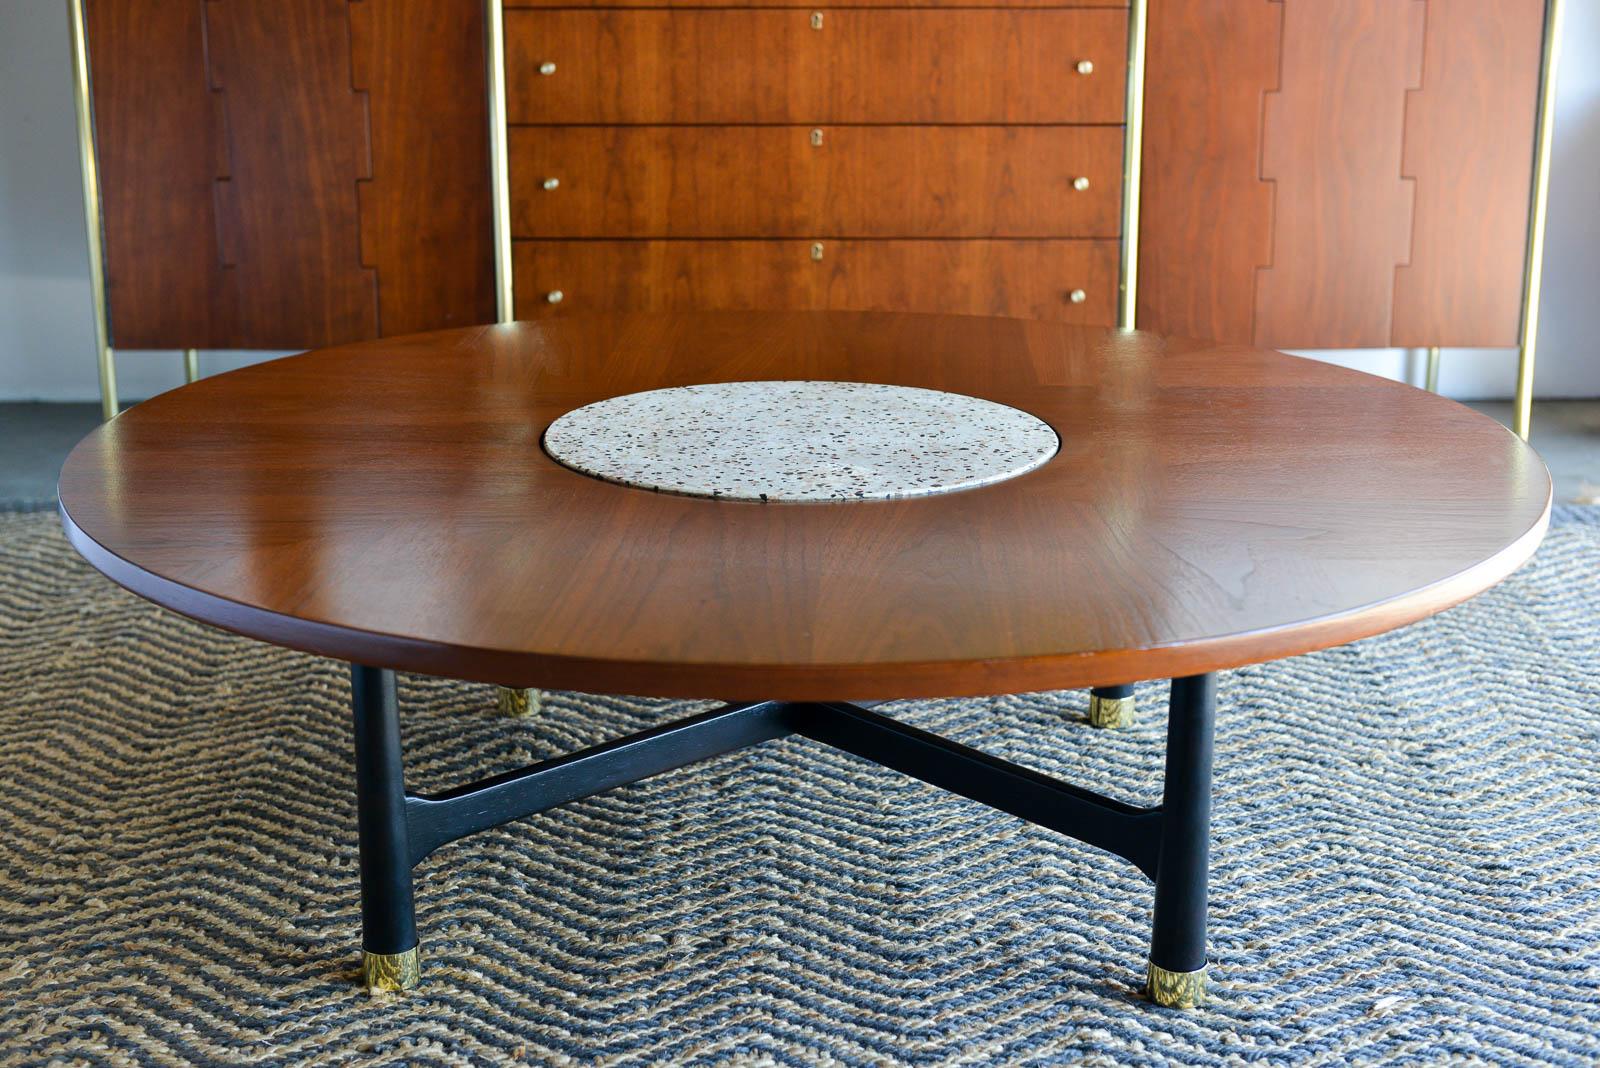 Walnut and terrazzo coffee table by Harvey Probber, circa 1960. Professionally restored with walnut top, original terrazzo inset and ebonized base with polished brass feet. Gorgeous design, one of his classics and most popular. Very functional and